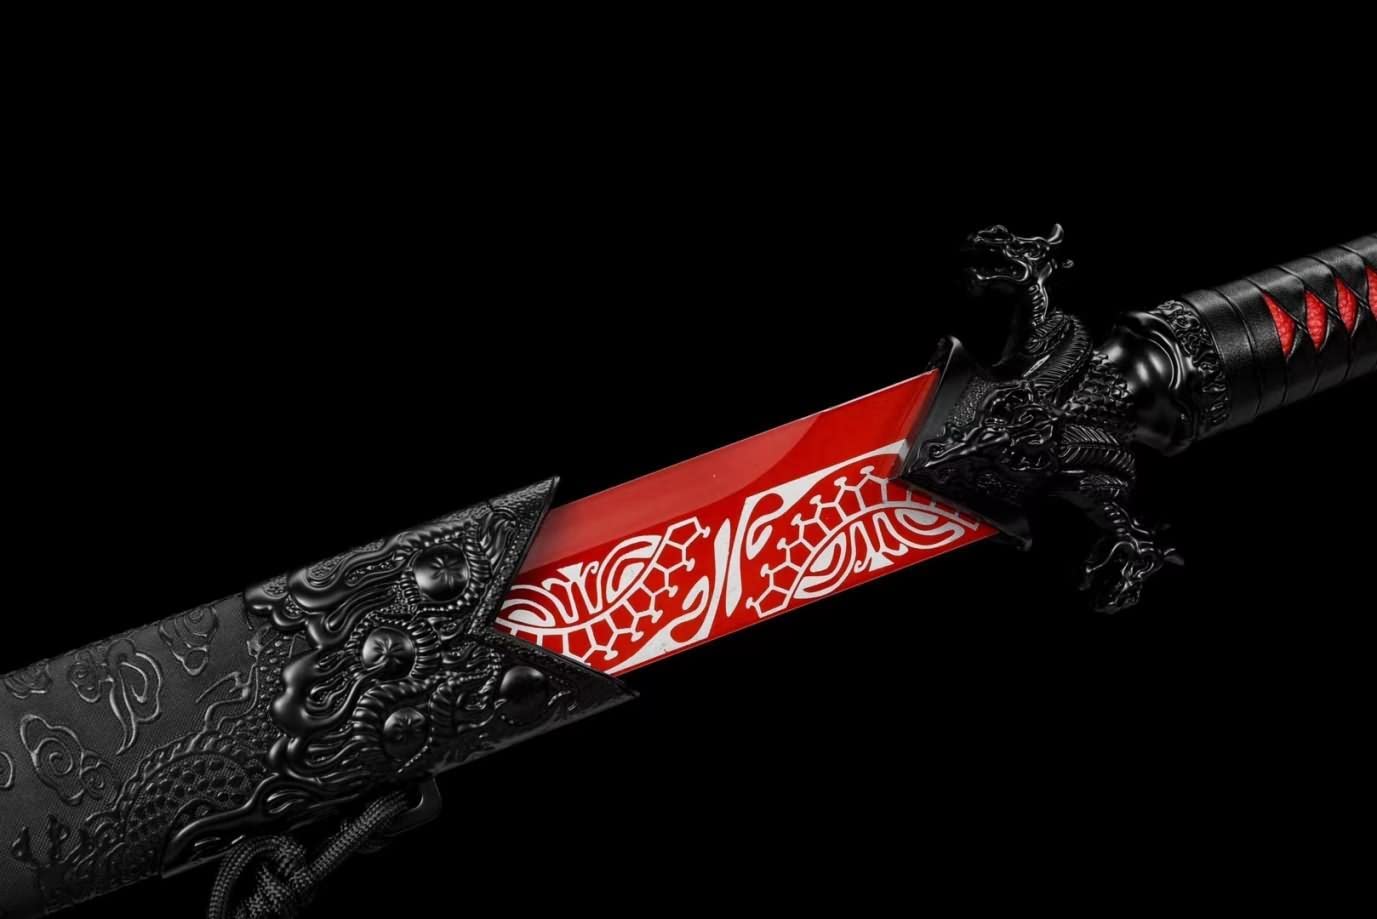 LOONGSWORD,Chinese Swords Real,Dragon Tang dao,Hand Forged High Carbon Steel red Blade,Alloy Fittings